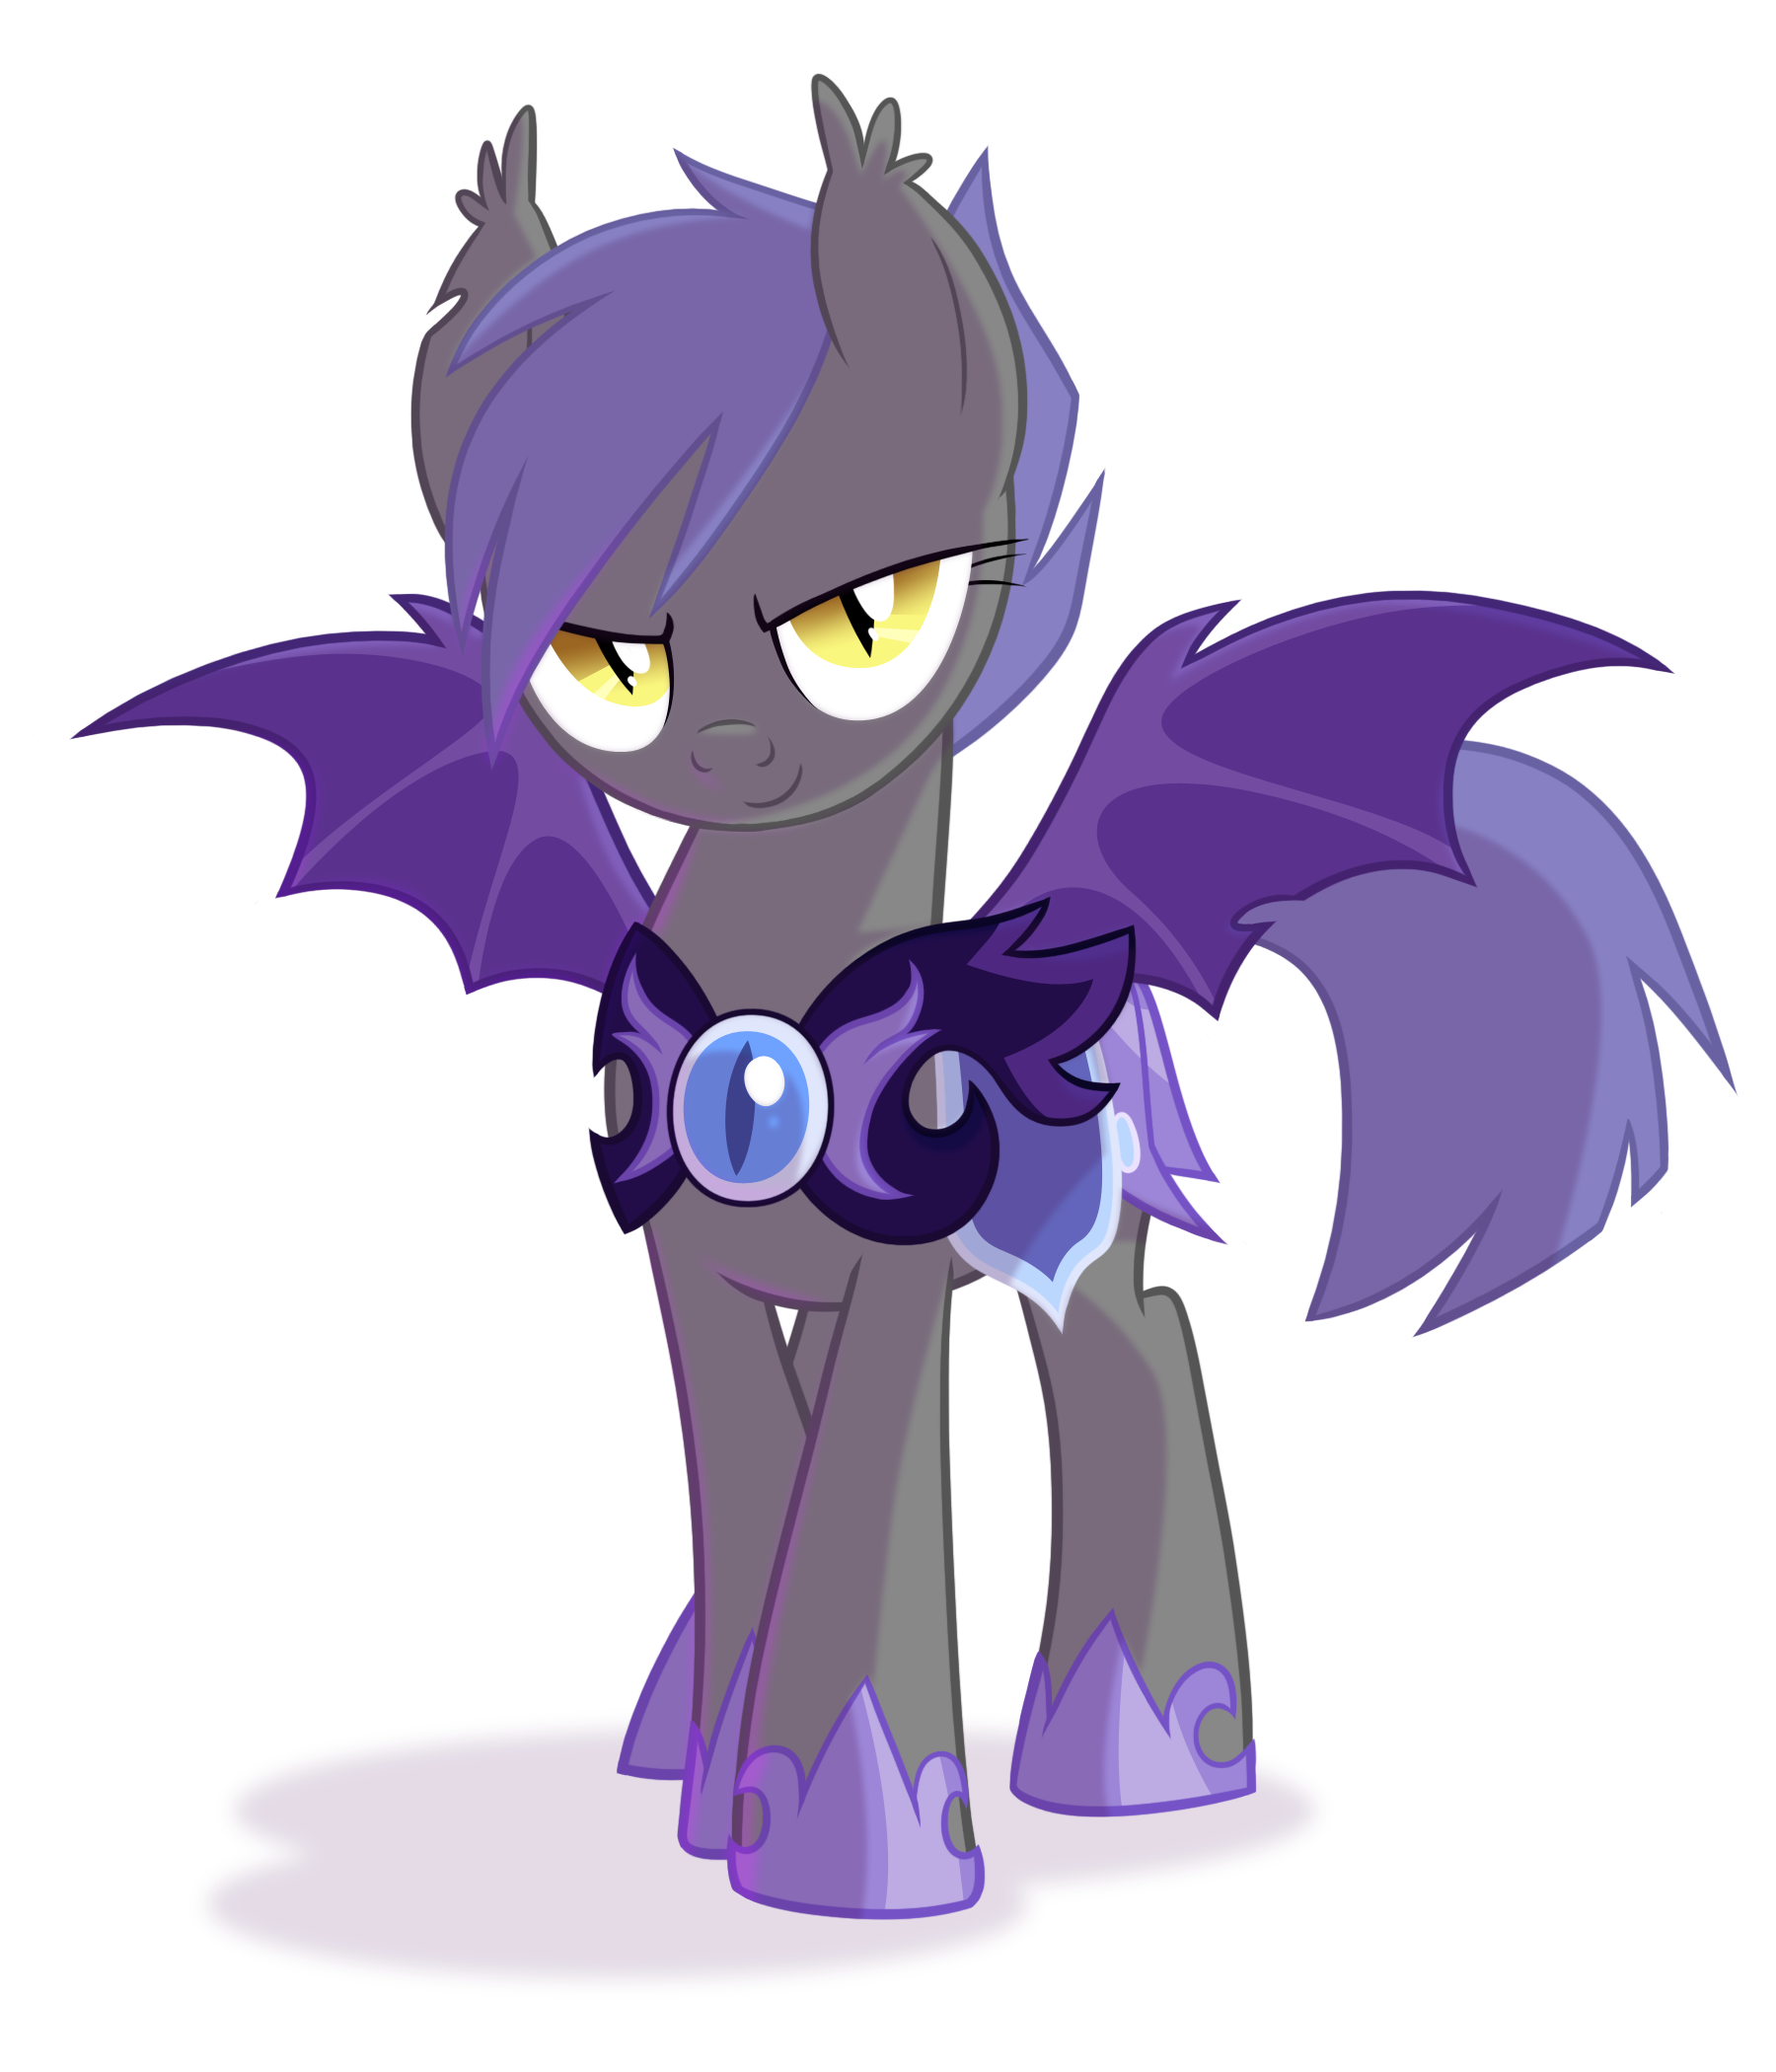 the_shadow_by_equestria_prevails-d54glun